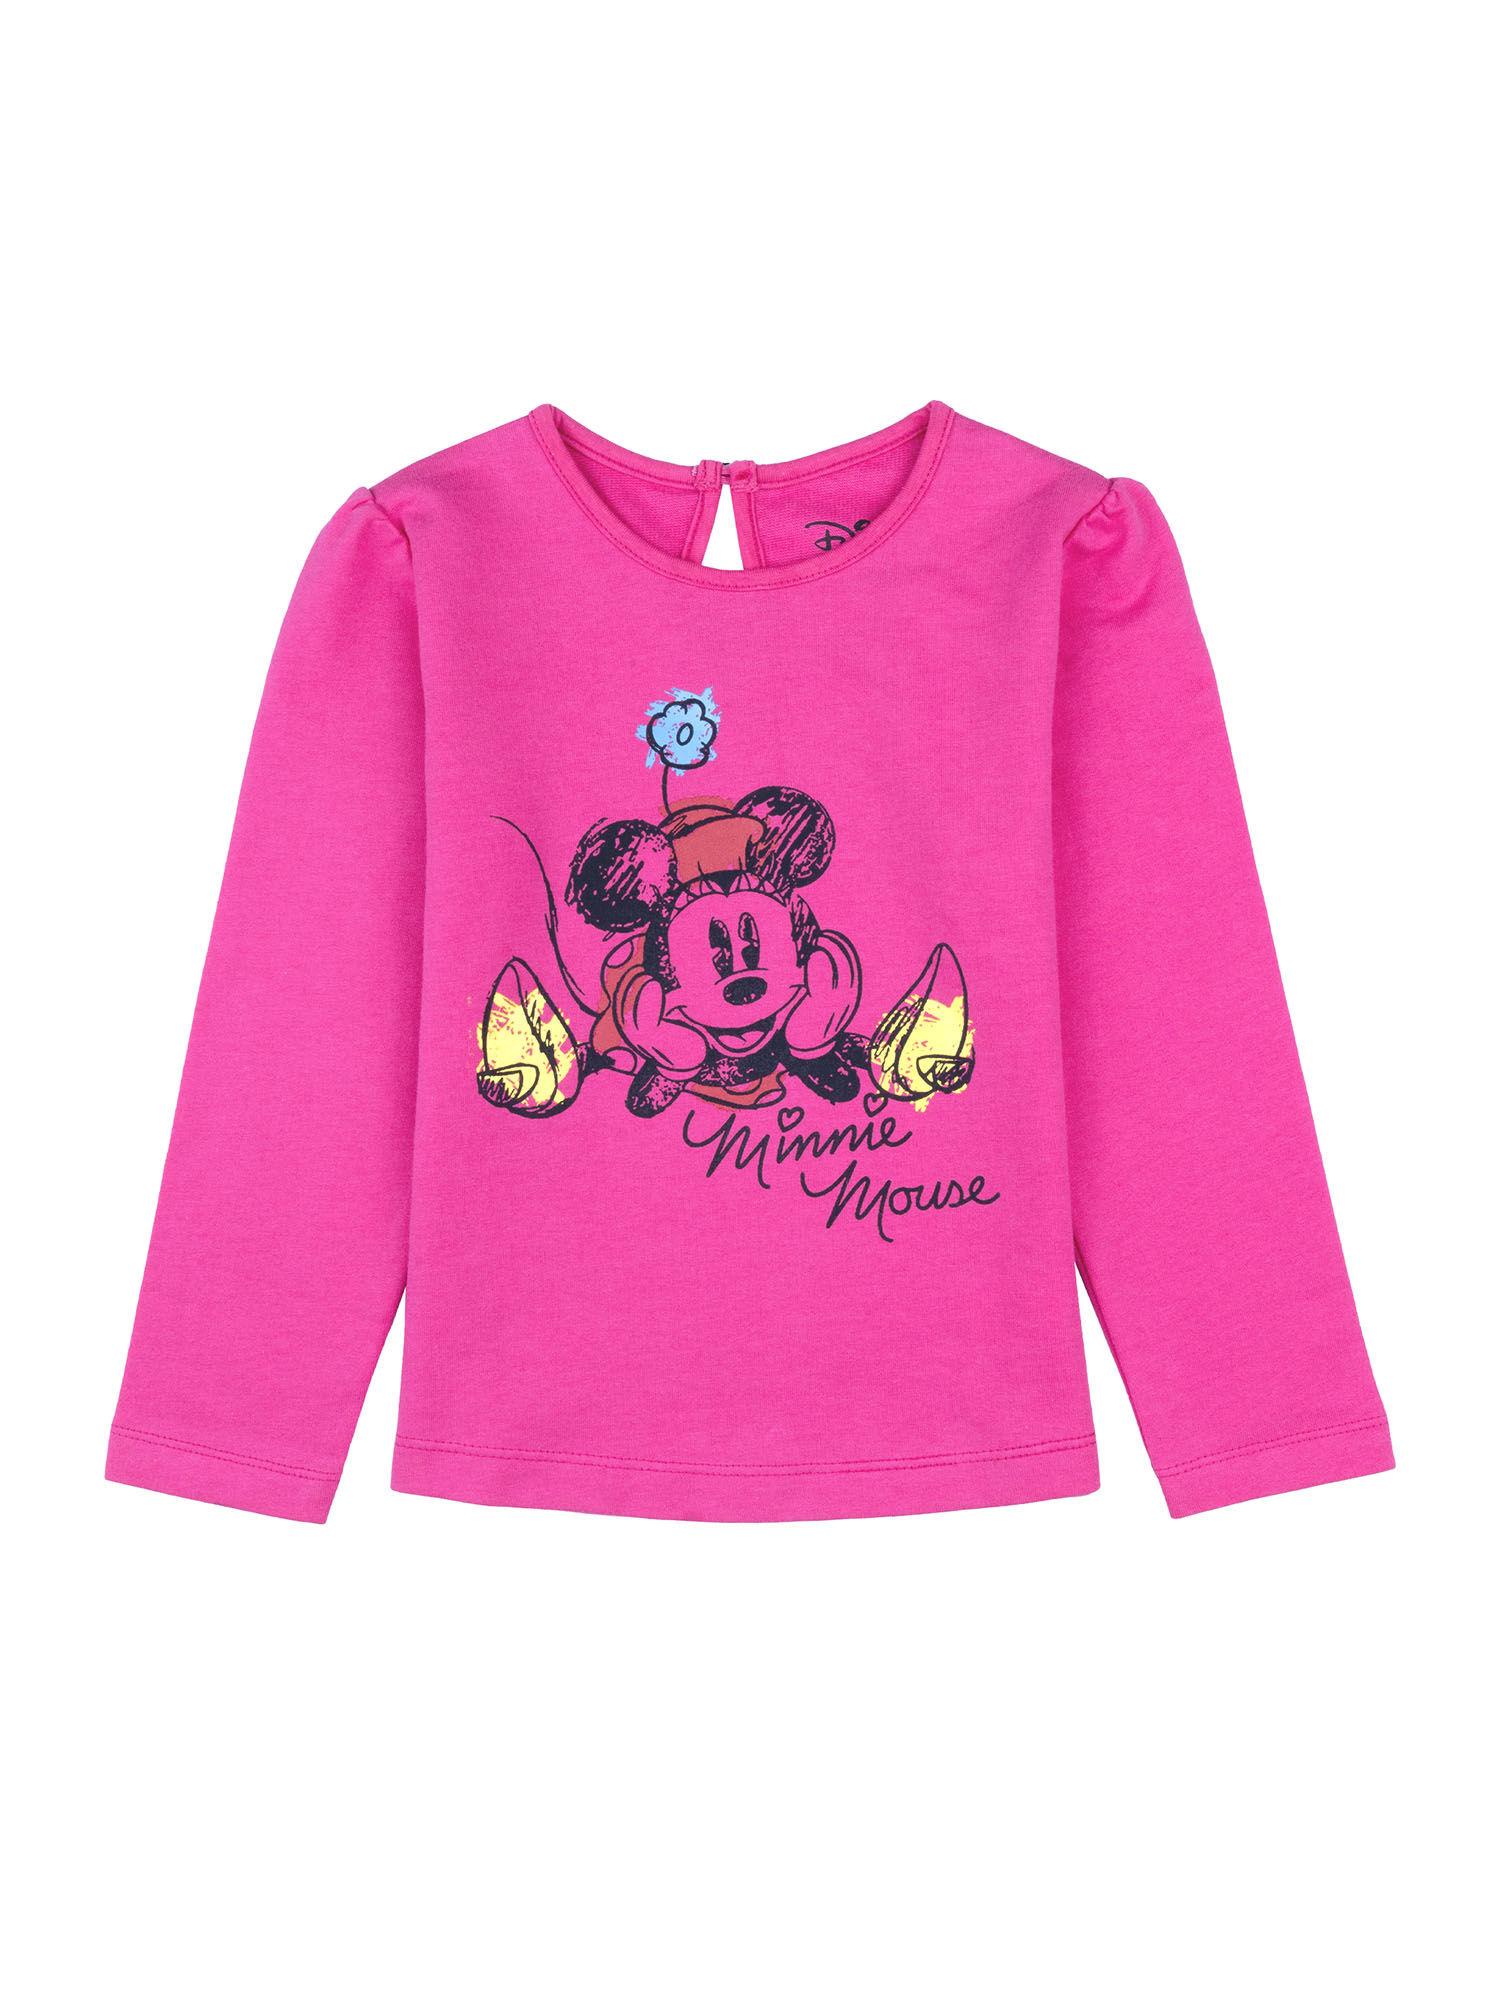 girls minnie "minnie mouse"printed full sleeve pink cotton tshirt